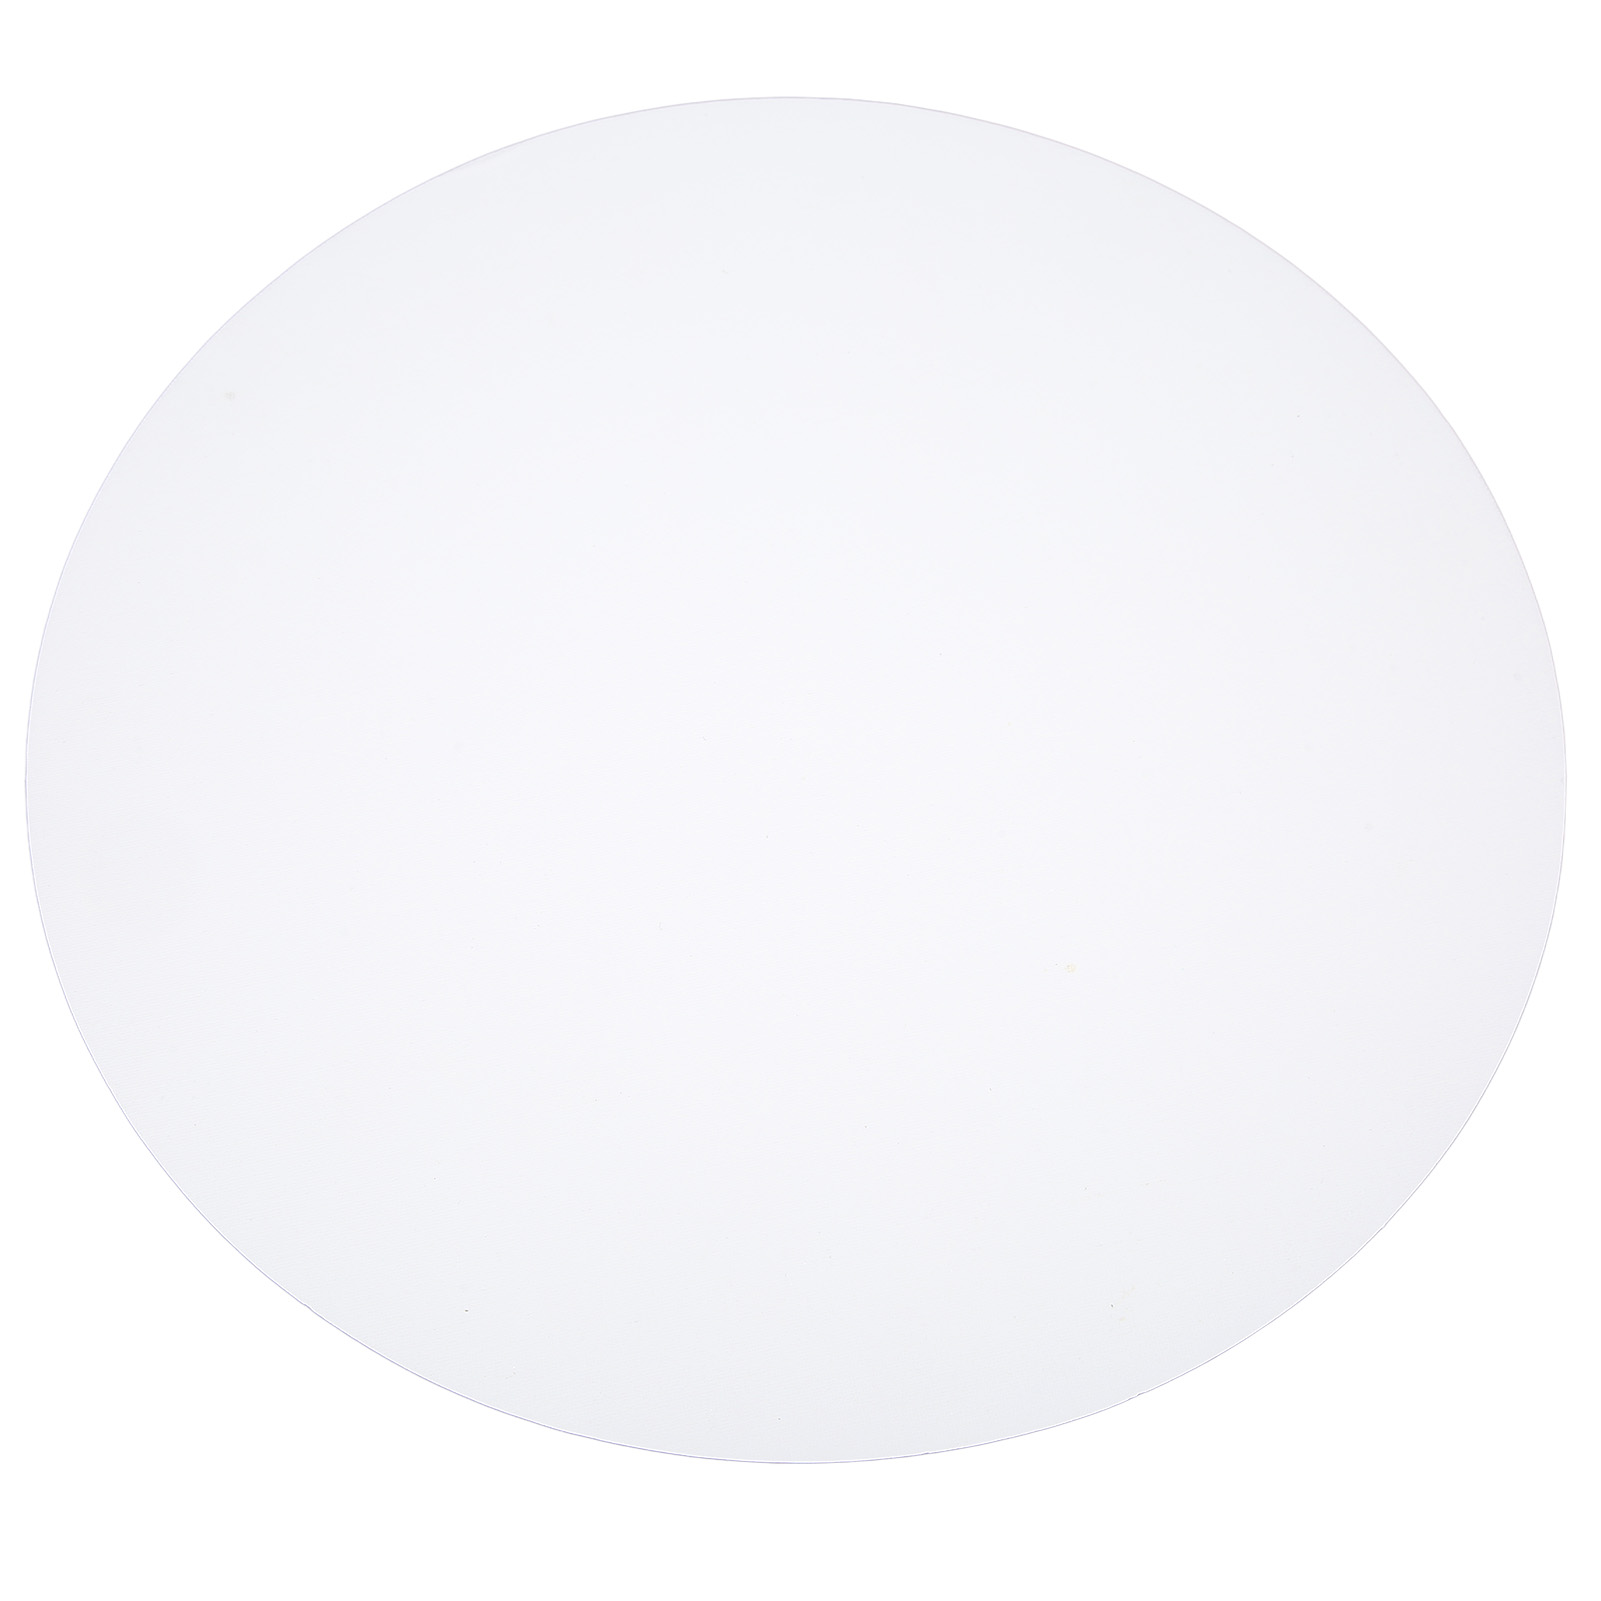 EOTVIA Large Canvas,Round Canvas,40cm Round Canvas Professional 4 Layer  Structure Cotton Circle Canvas Board For Painting Acrylic Pouring Oil Paint